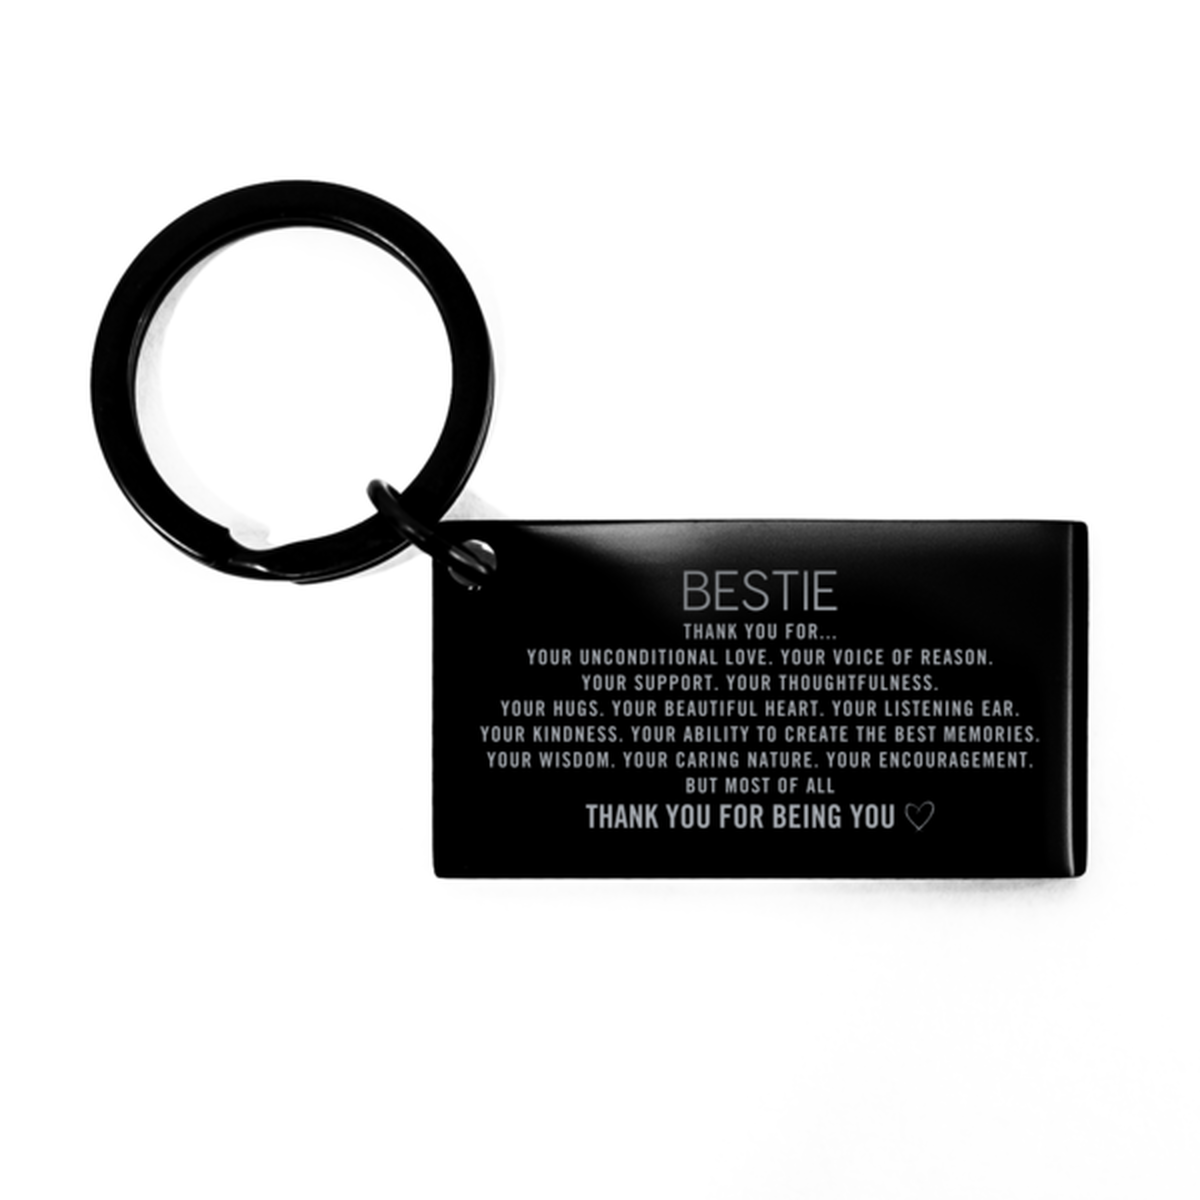 Bestie Keychain Custom, Engraved Gifts For Bestie Christmas Graduation Birthday Gifts for Men Women Bestie Thank you for Your unconditional love